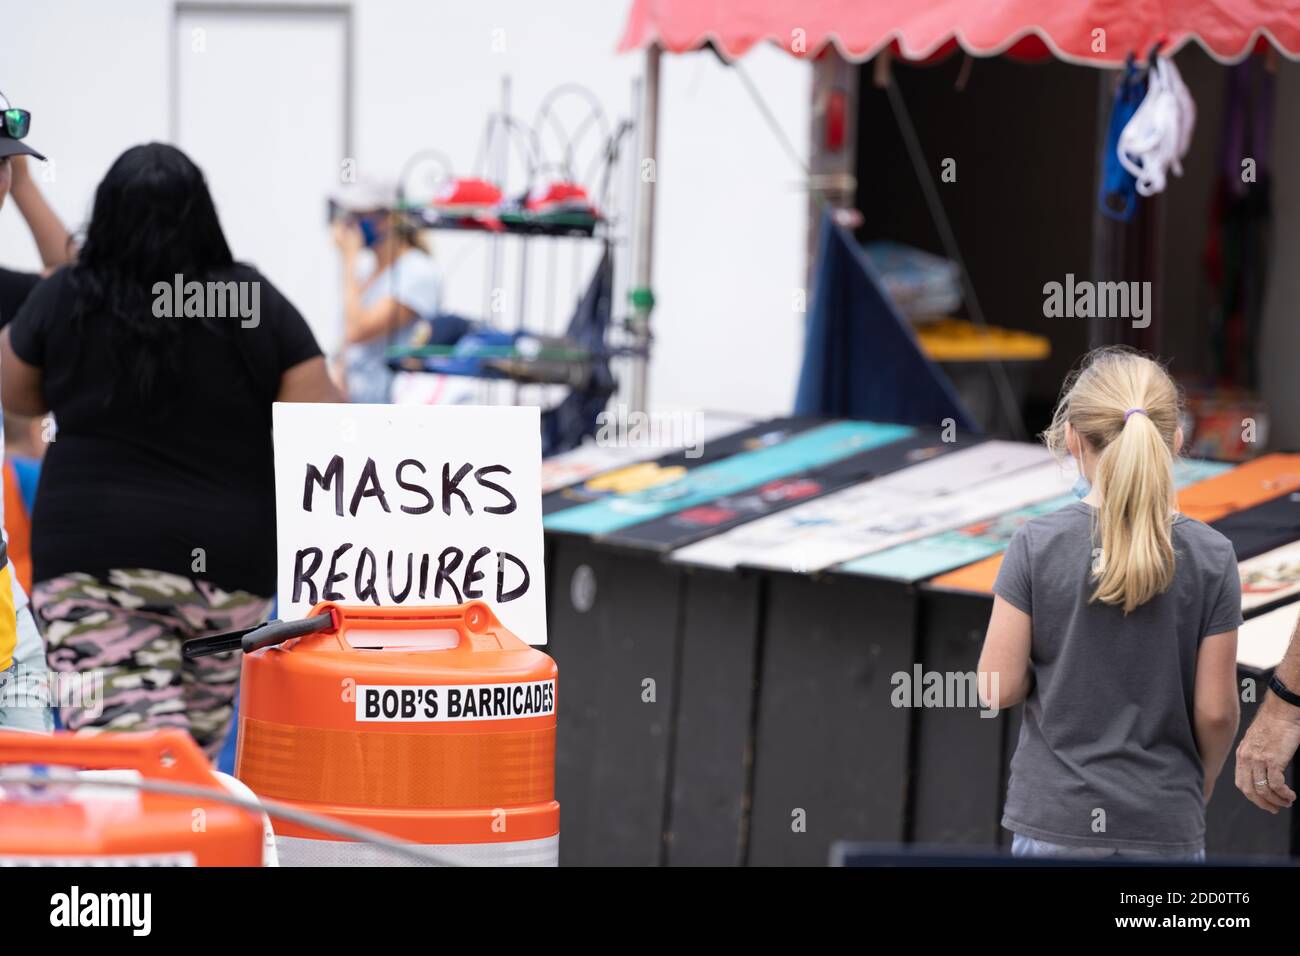 FORT LAUDERDALE, FL, USA - NOVEMBER 22, 2020: Face mask required sign at the Fort Lauderdale Air and Sea Show during Covid 19 Coronavirus pandemic Stock Photo